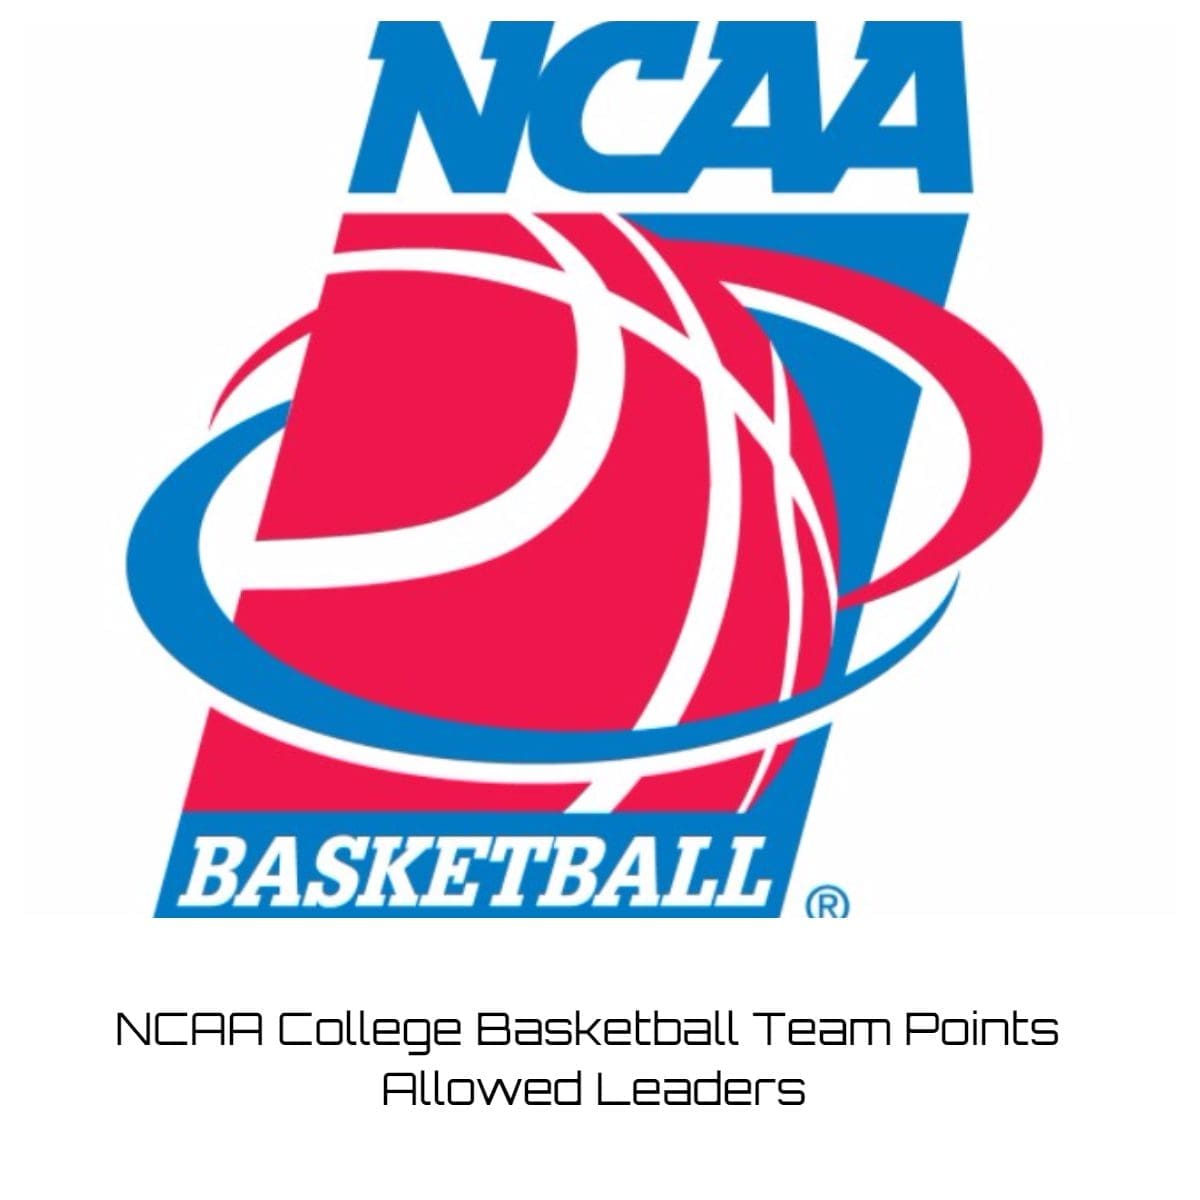 NCAA College Basketball Team Points Allowed Leaders